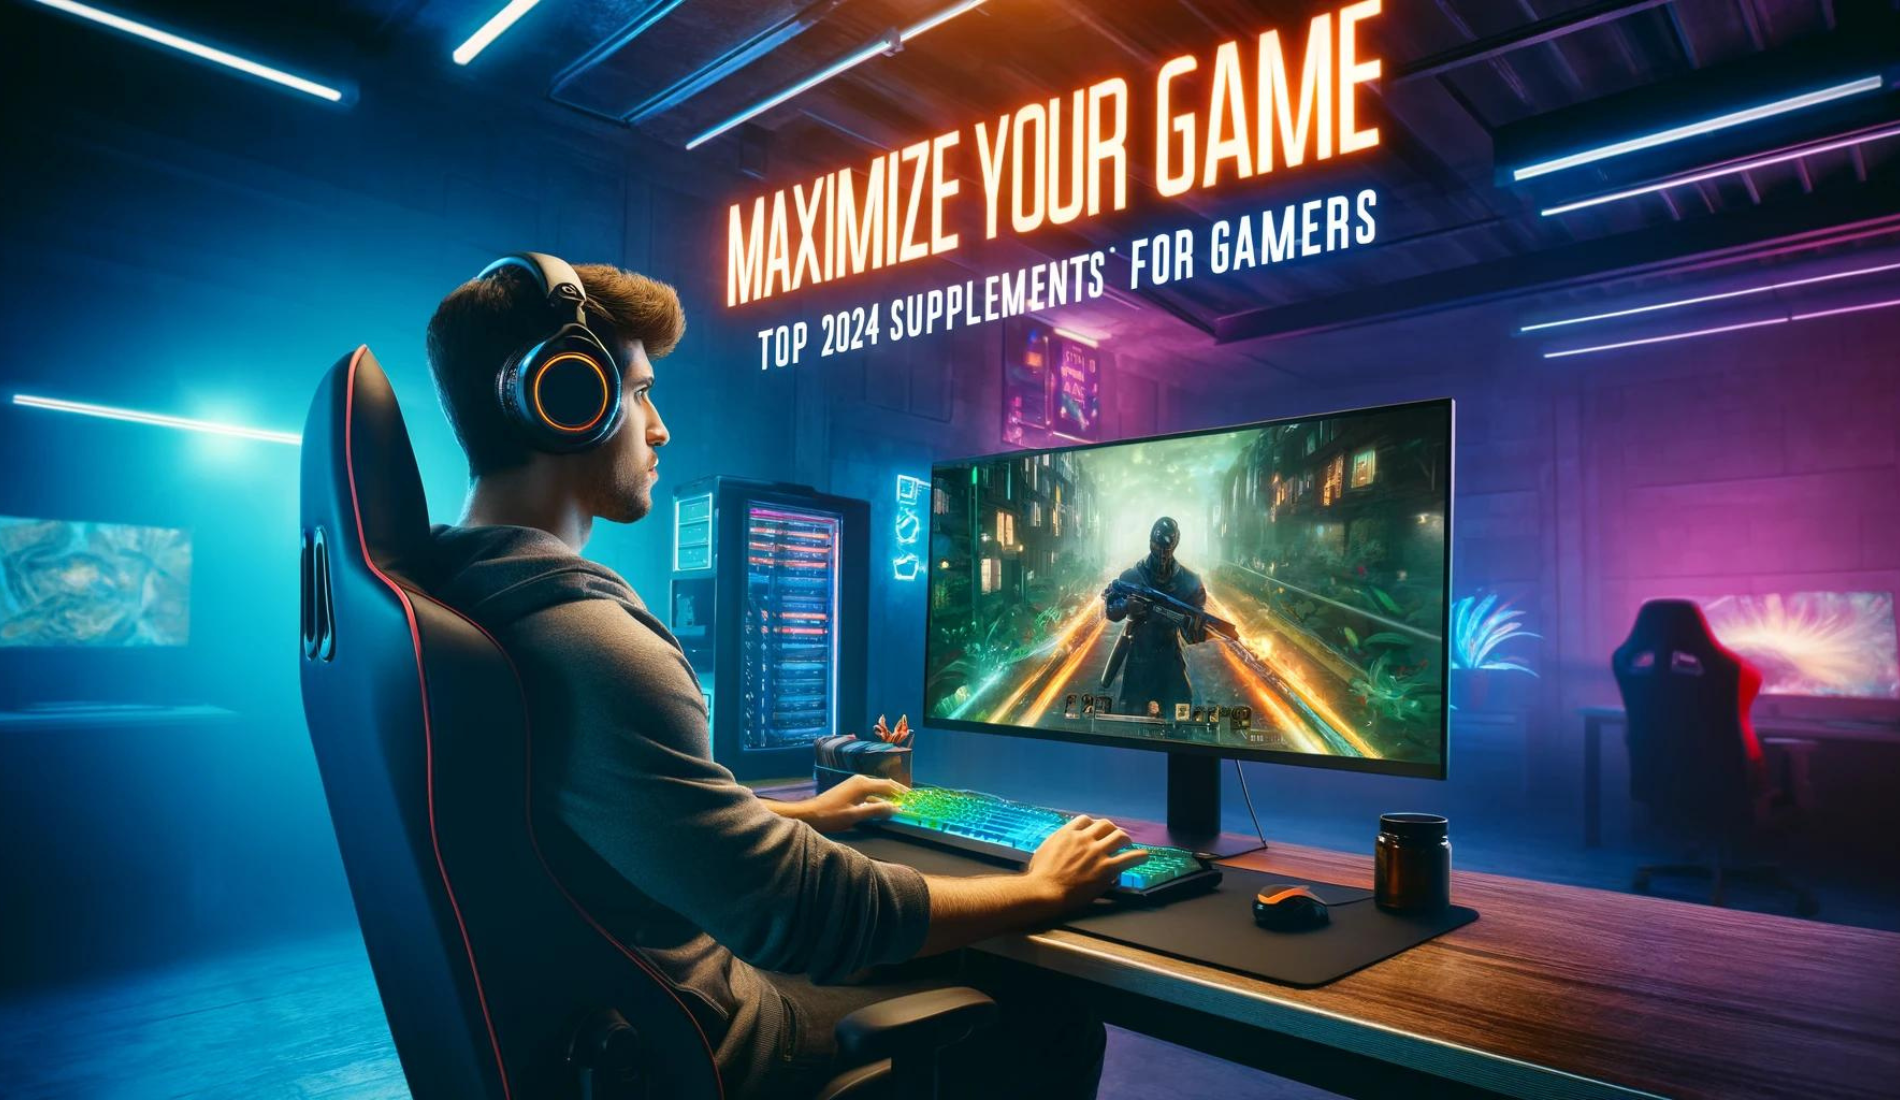 Maximize Your Game: Top 2024 Supplements for Gamers